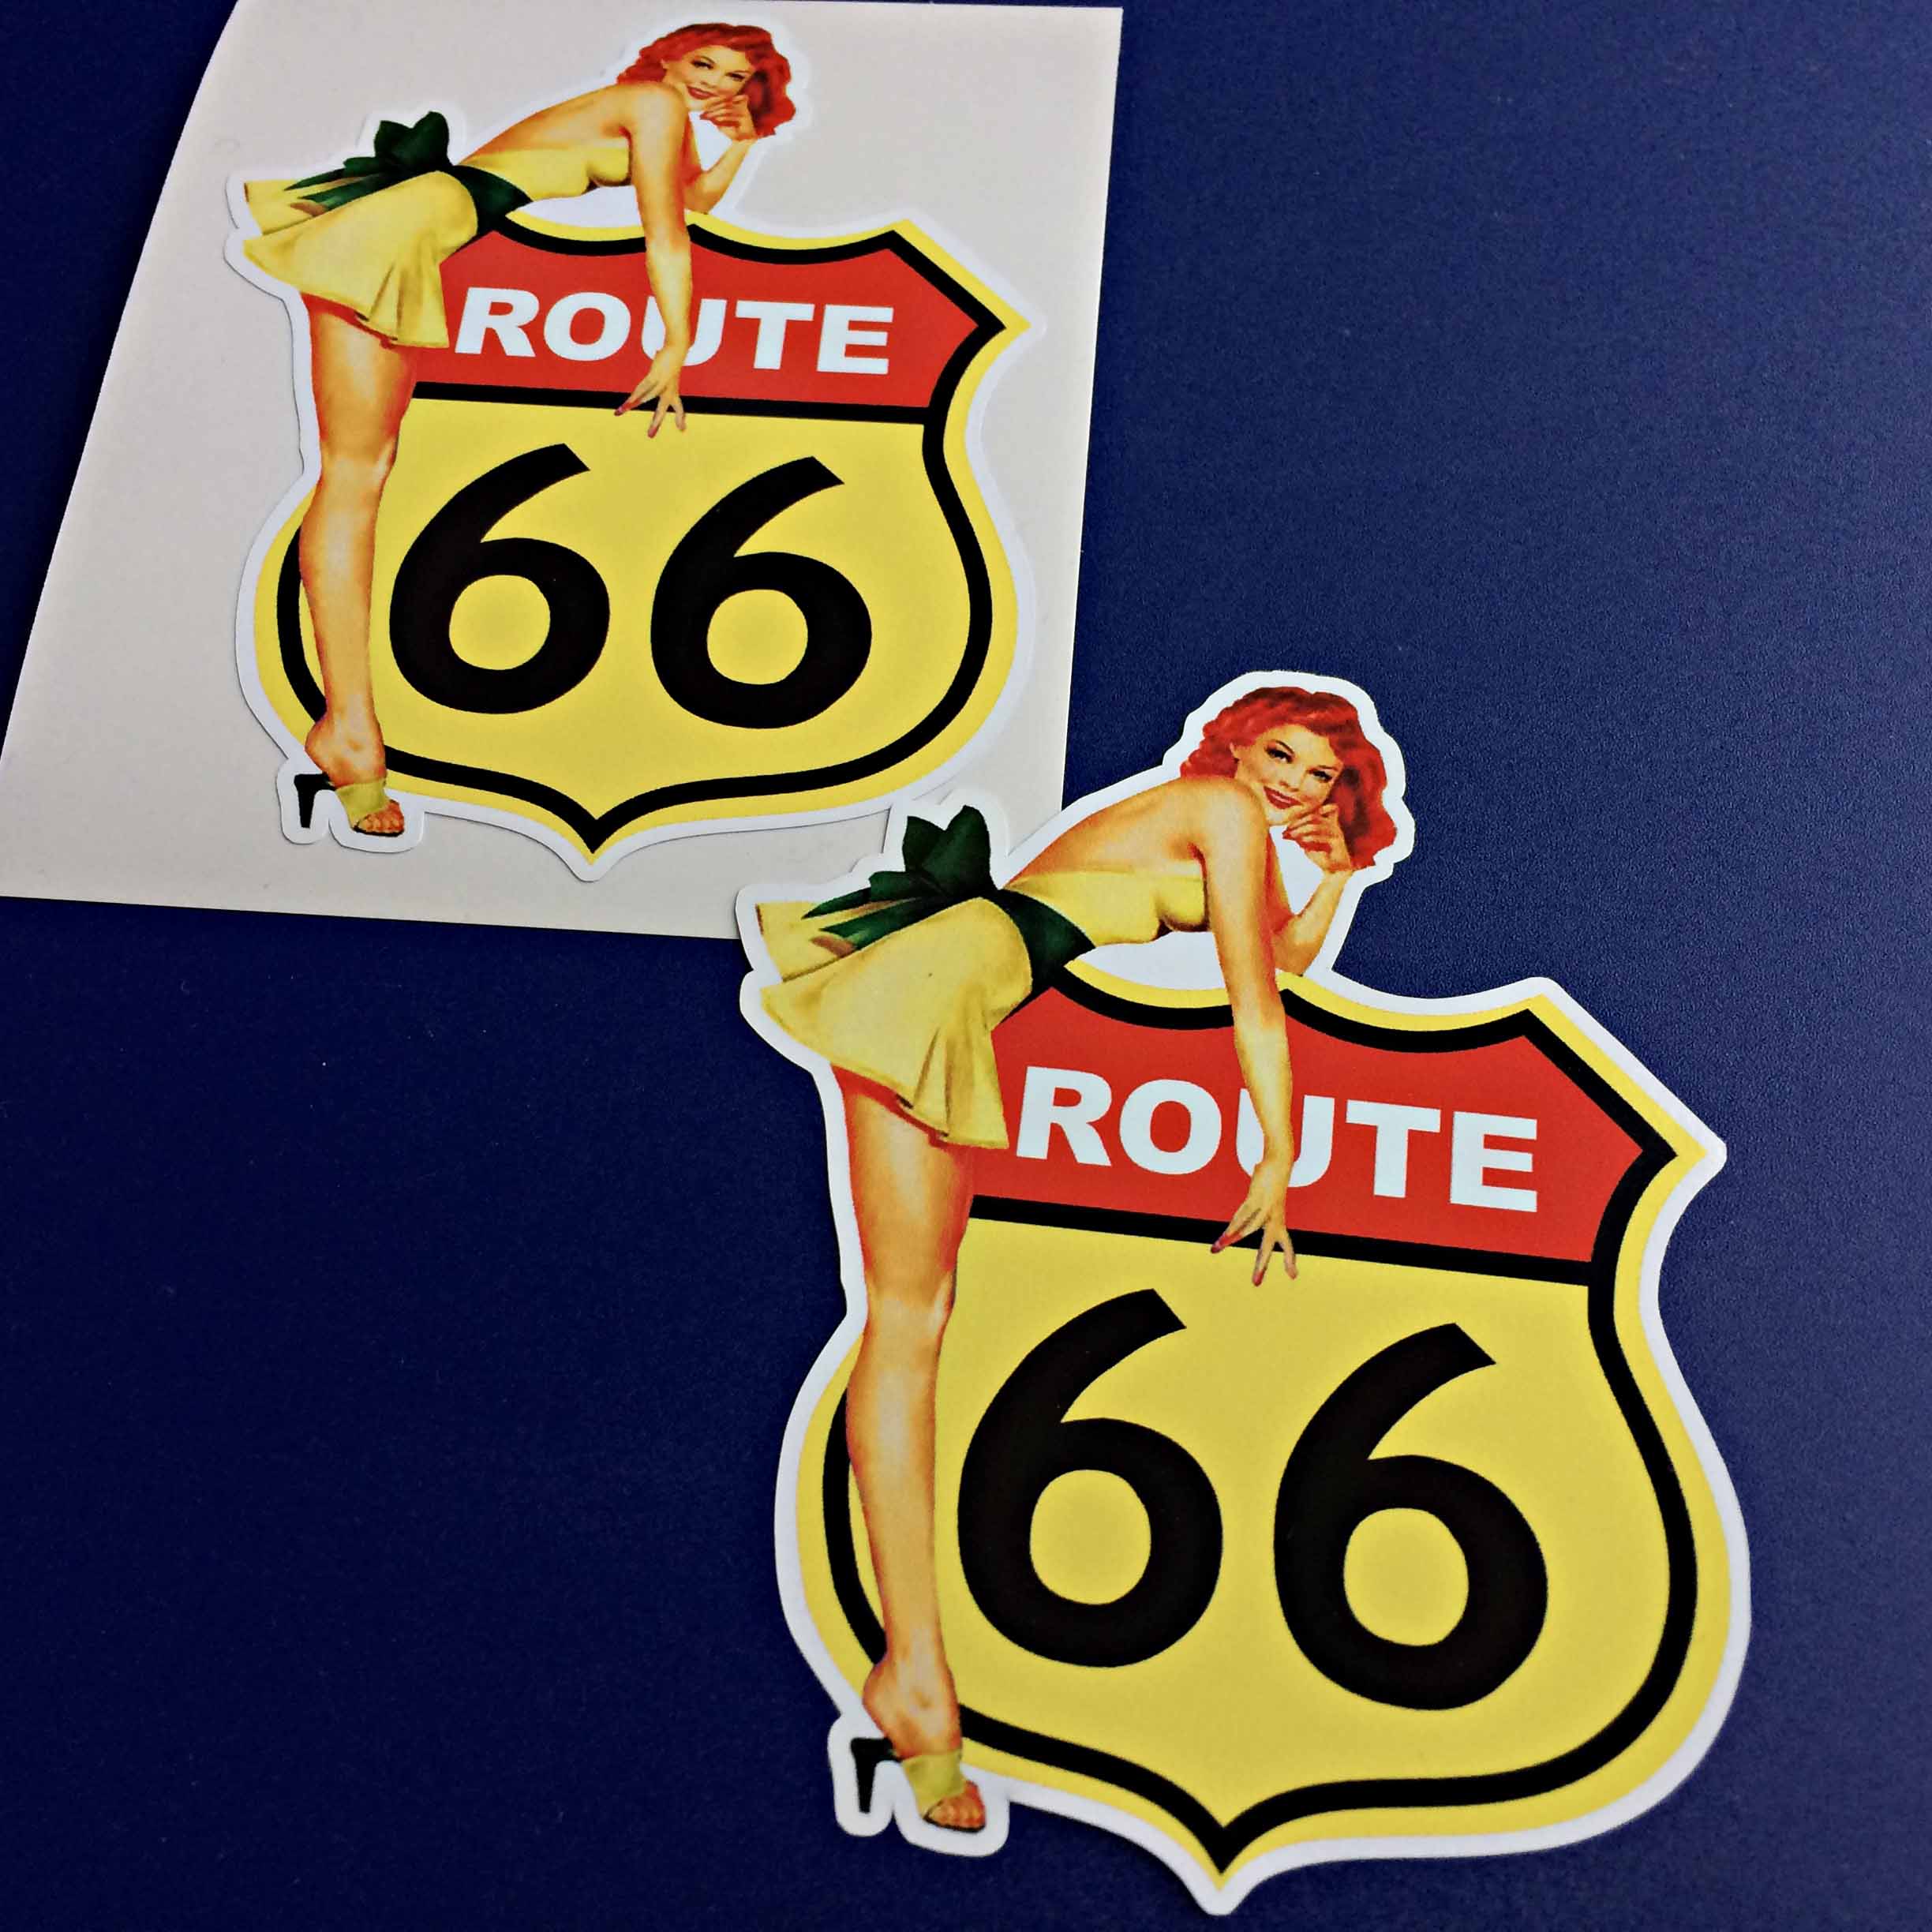 Route 66 sign in yellow. Route white lettering on red and 66 in bold black. A model wearing a short yellow dress with a black bow and yellow heels leans over the sign.